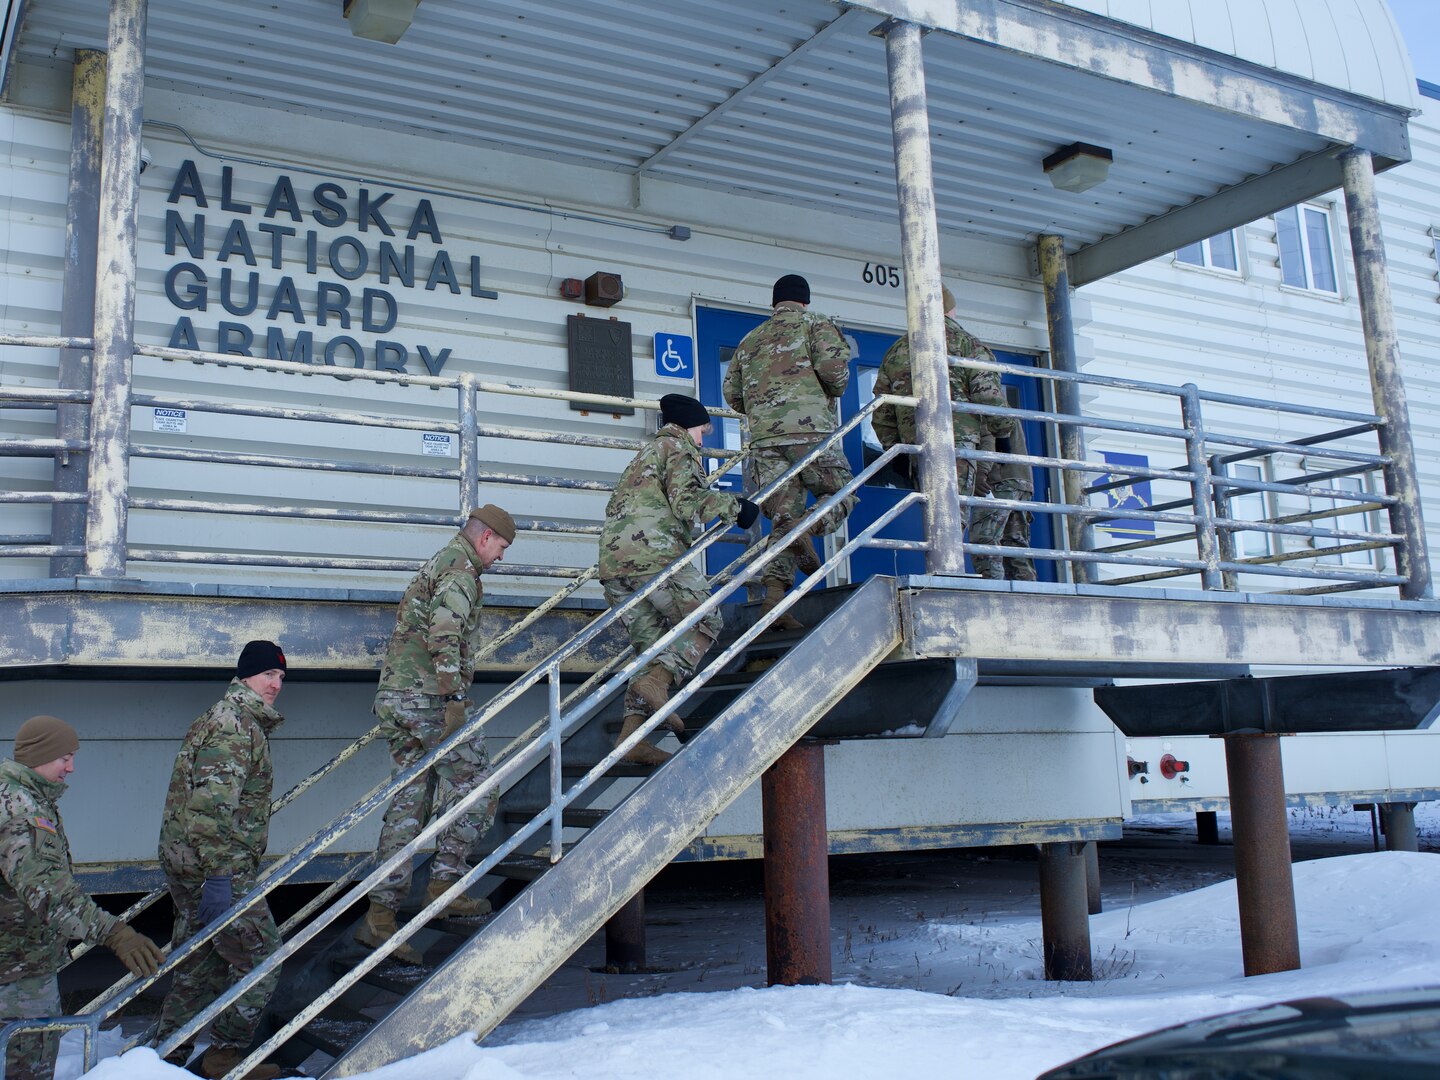 National Guard Arctic Interest Council delegates representing the Alaska, Michigan, Minnesota, Montana, New Hampshire and North Dakota National Guard and the National Guard Bureau tour the Kotzebue National Guard Armory March 29, 2022. The armory is one of 19 armories statewide and serves the region surrounding the Northwest Arctic Borough.